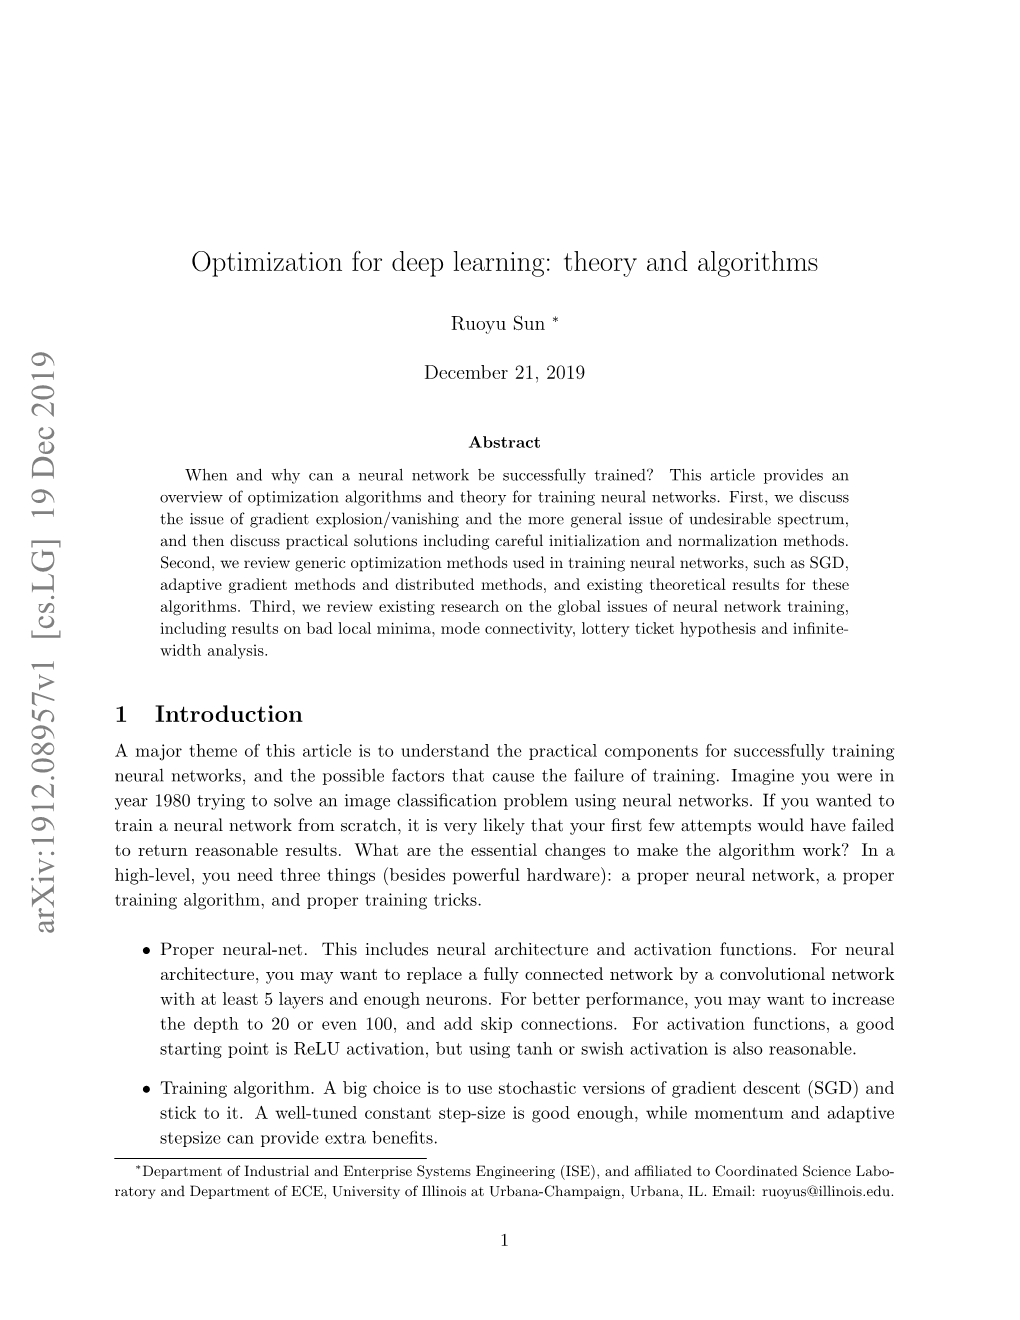 Optimization for Deep Learning: Theory and Algorithms